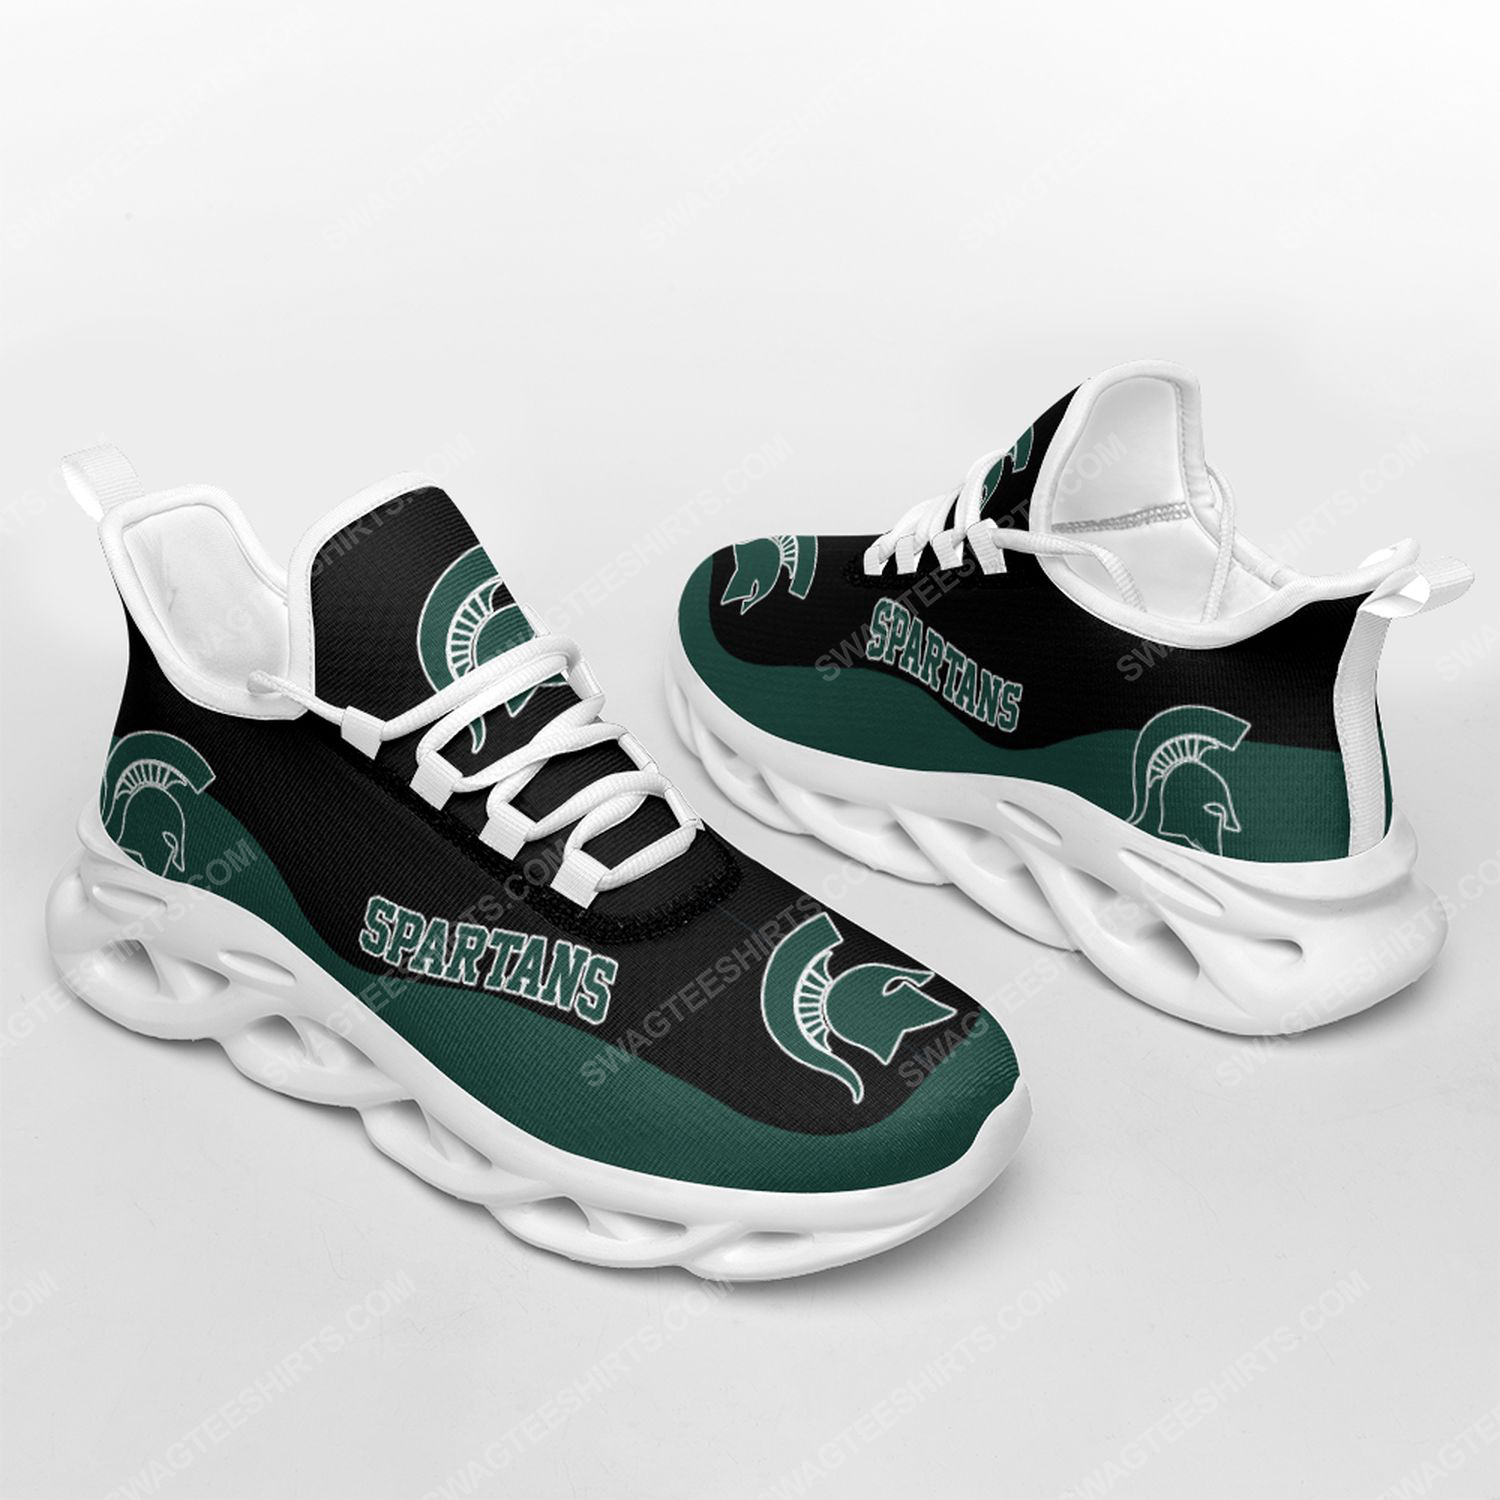 [special edition] The michigan state spartans football team max soul shoes – Maria